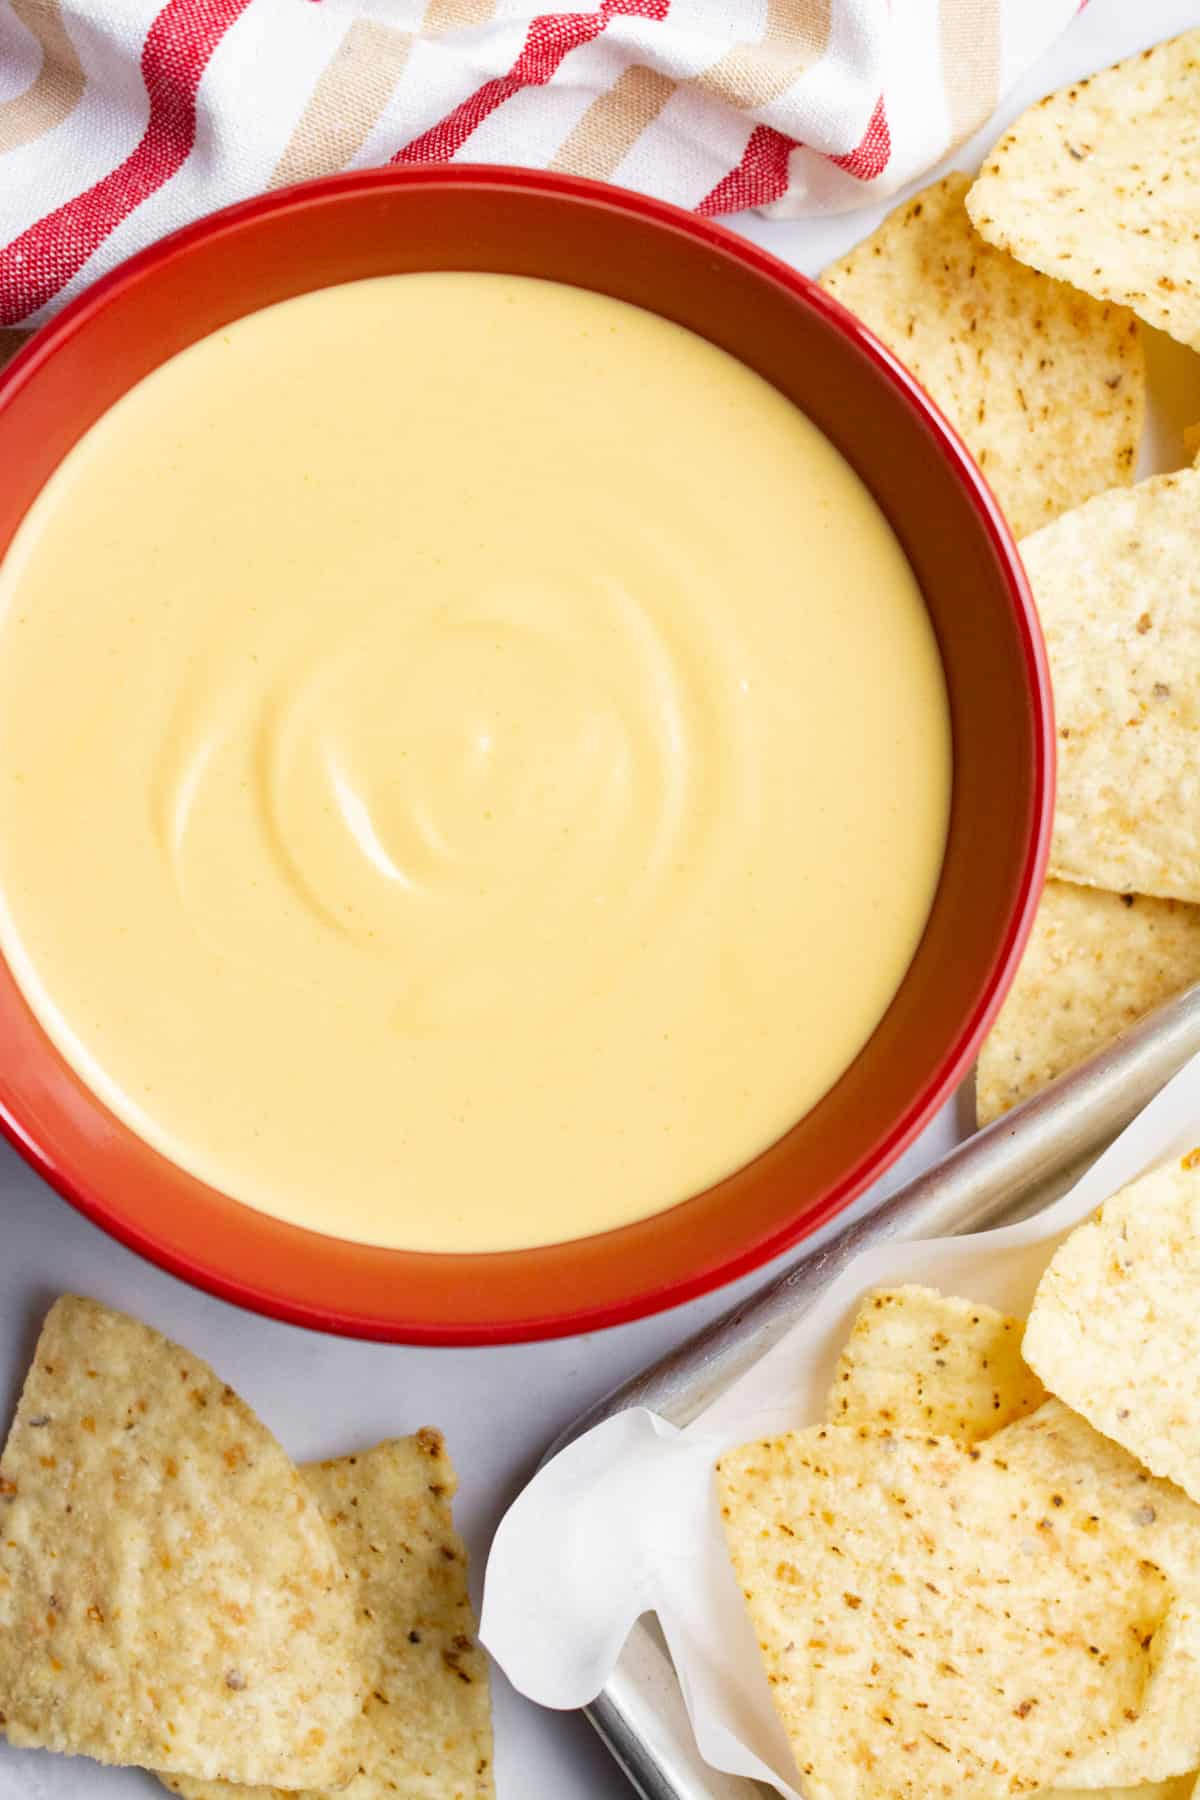 Vegan nacho cheese dip in a red bowl surrounded by tortilla chips